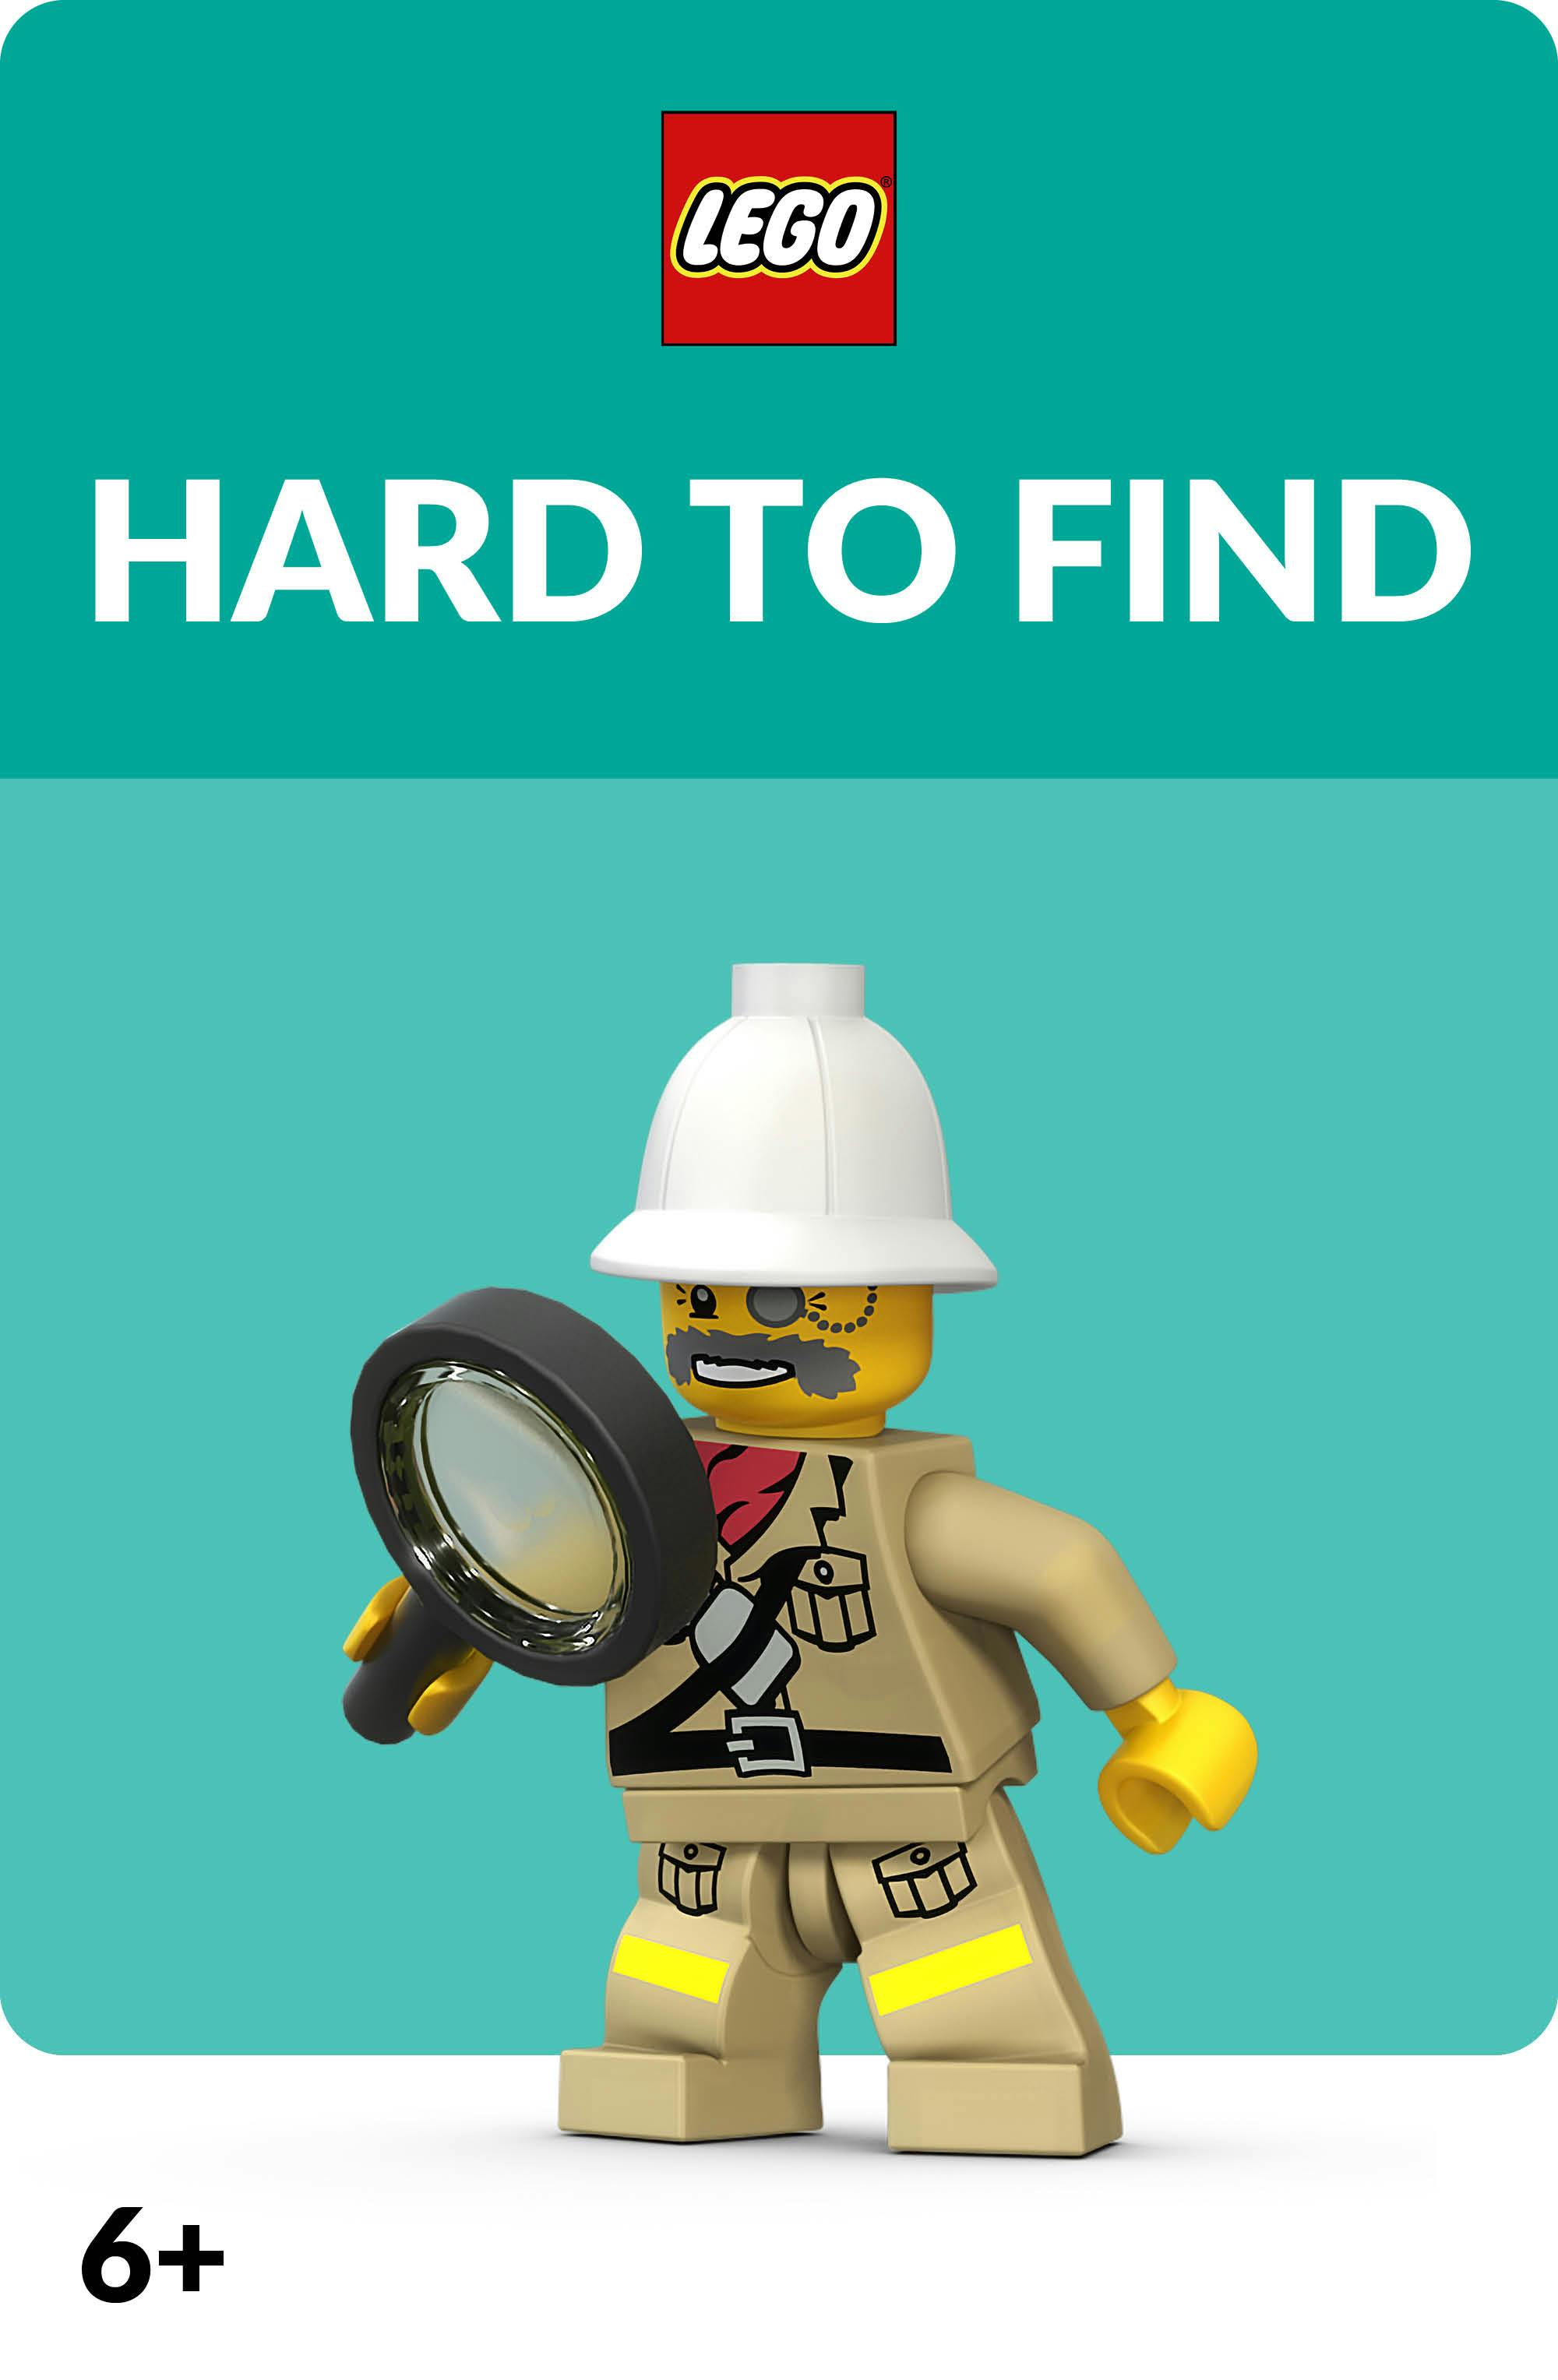 LEGO hard to find